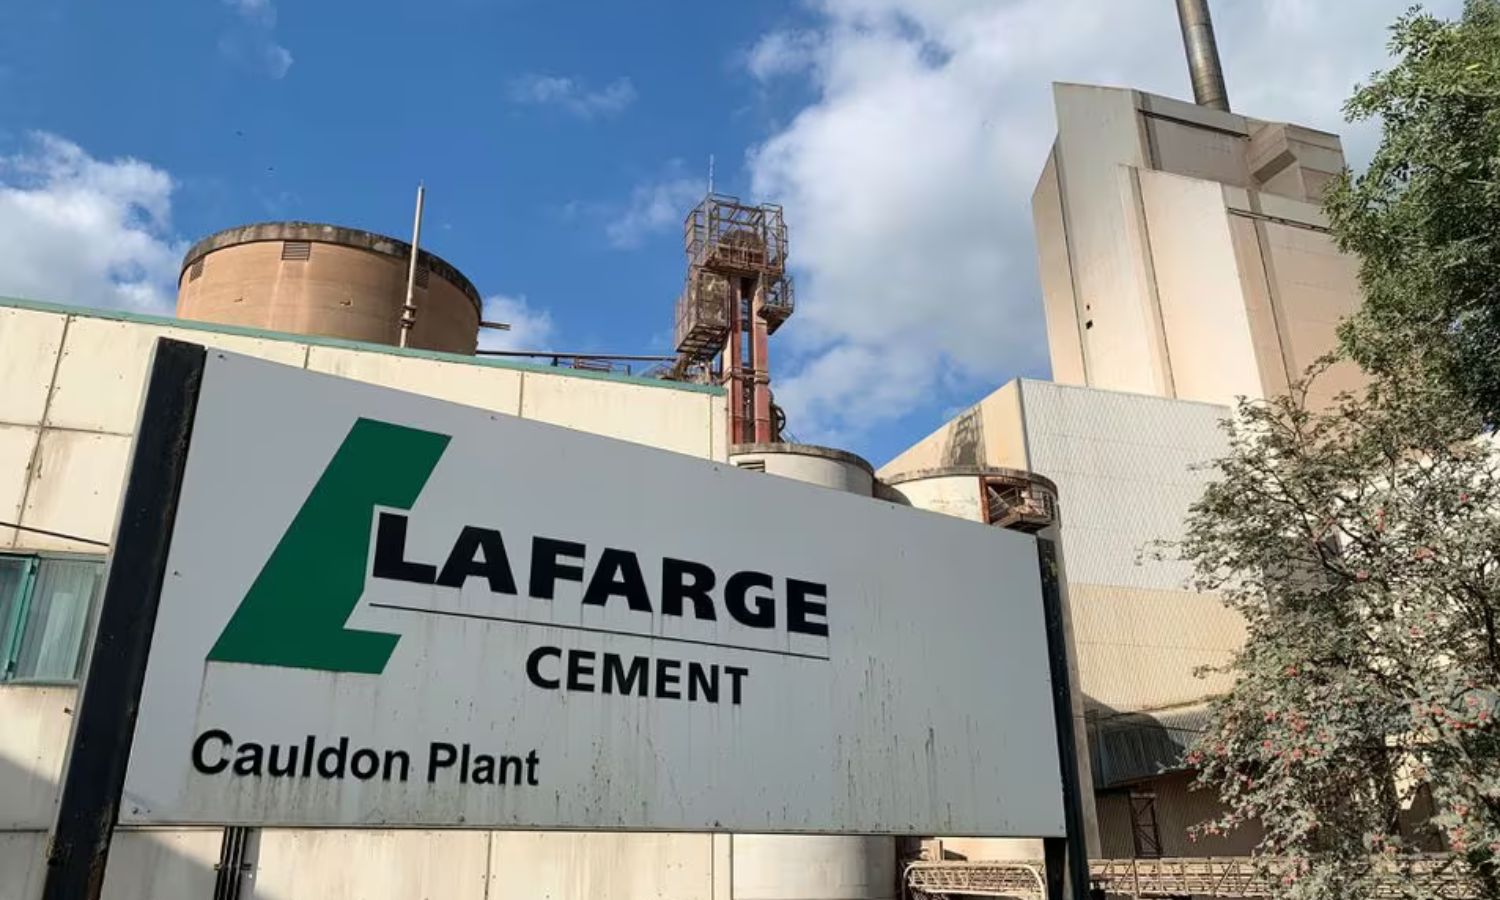 An exterior view of the Lafarge cement plant owned by Lafarge Holcim in the United Kingdom - September 17, 2021 (Reuters)